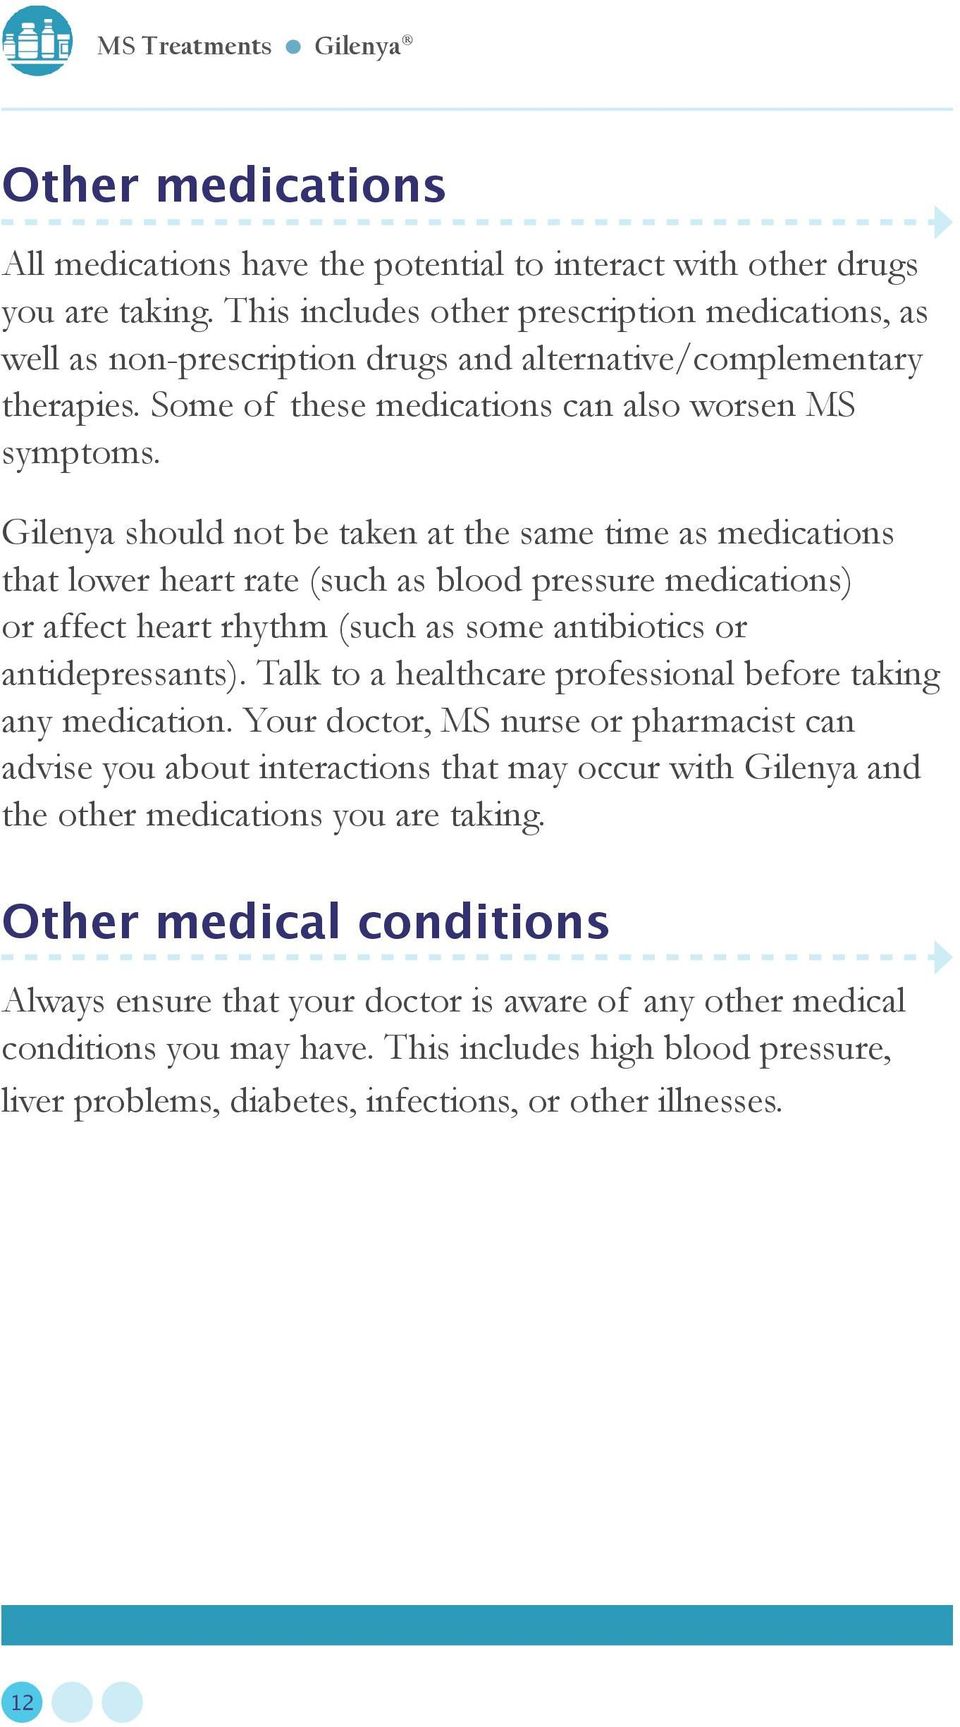 Gilenya should not be taken at the same time as medications that lower heart rate (such as blood pressure medications) or affect heart rhythm (such as some antibiotics or antidepressants).